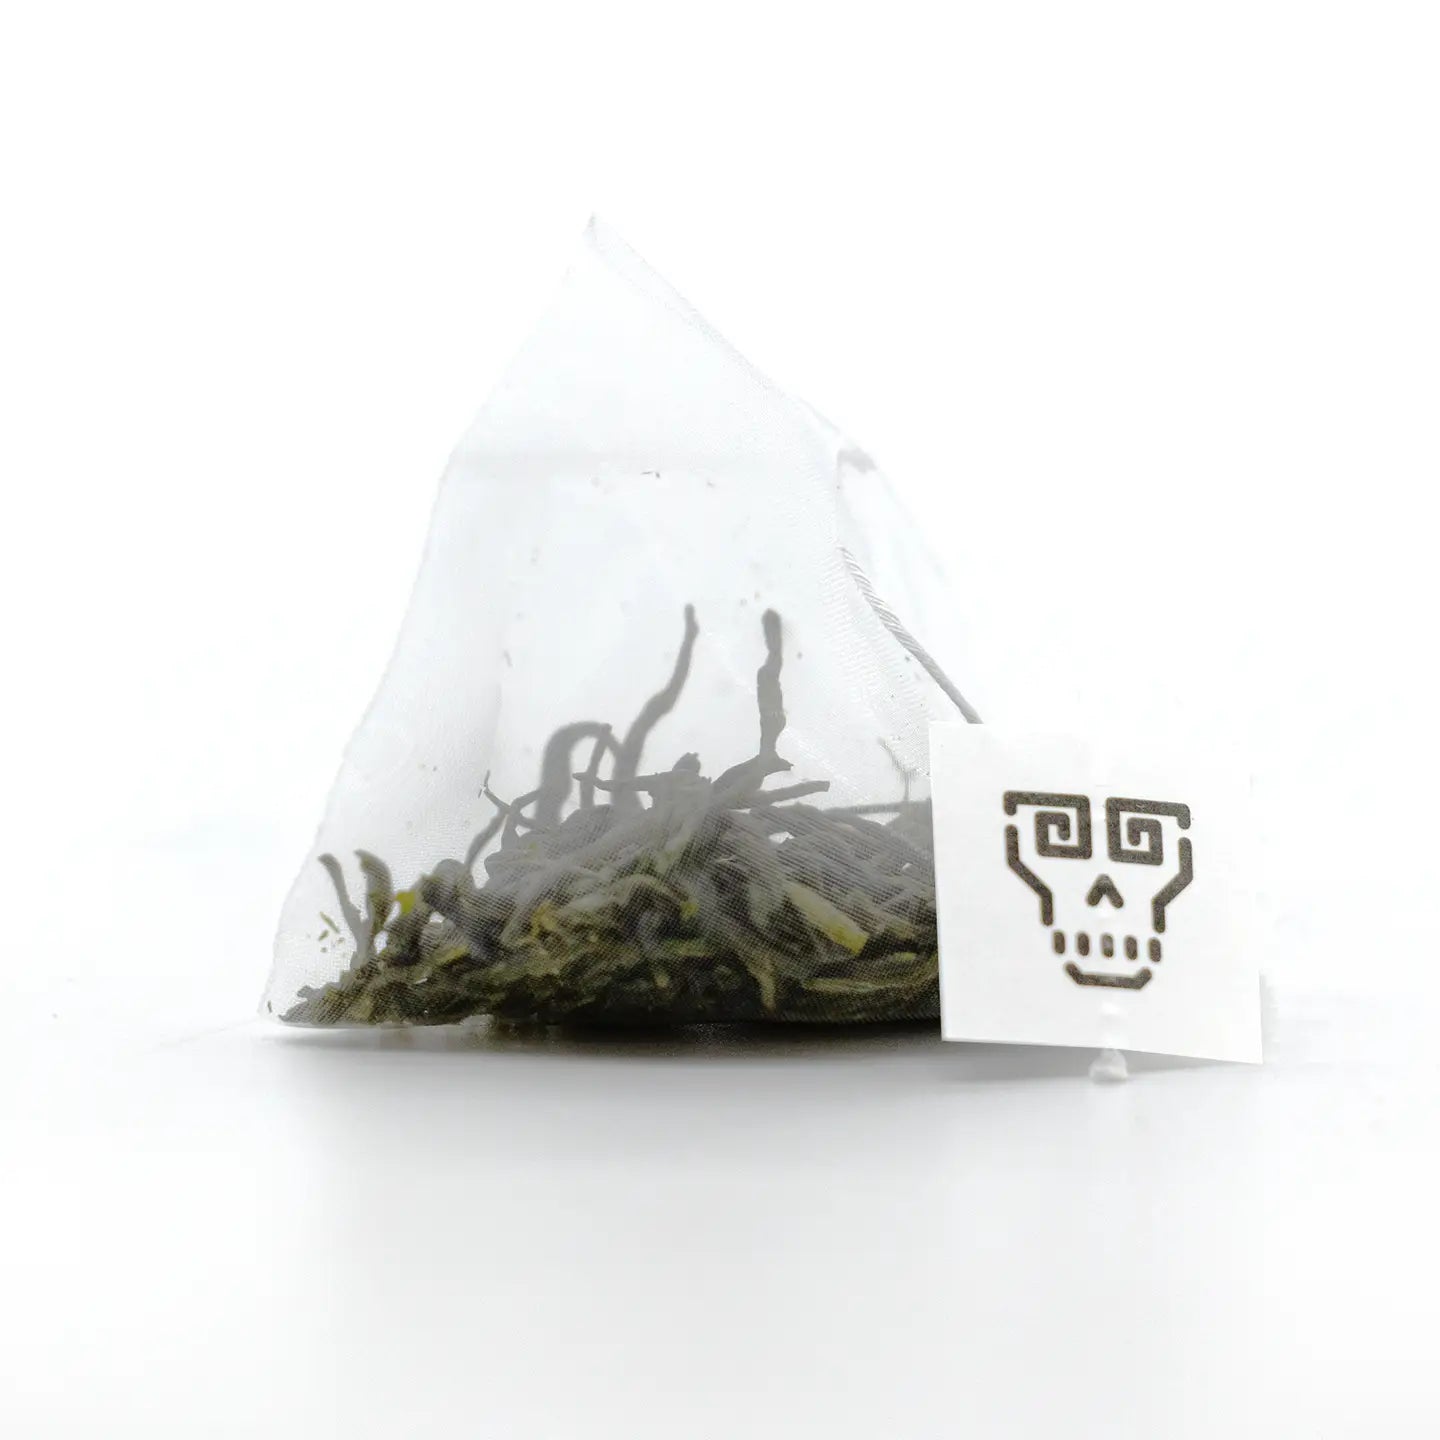 Xinyang Mao Jian Green Tea - Fresh Harvest 2022 | Authentic Hand-Processed Tea from Henan Province, China